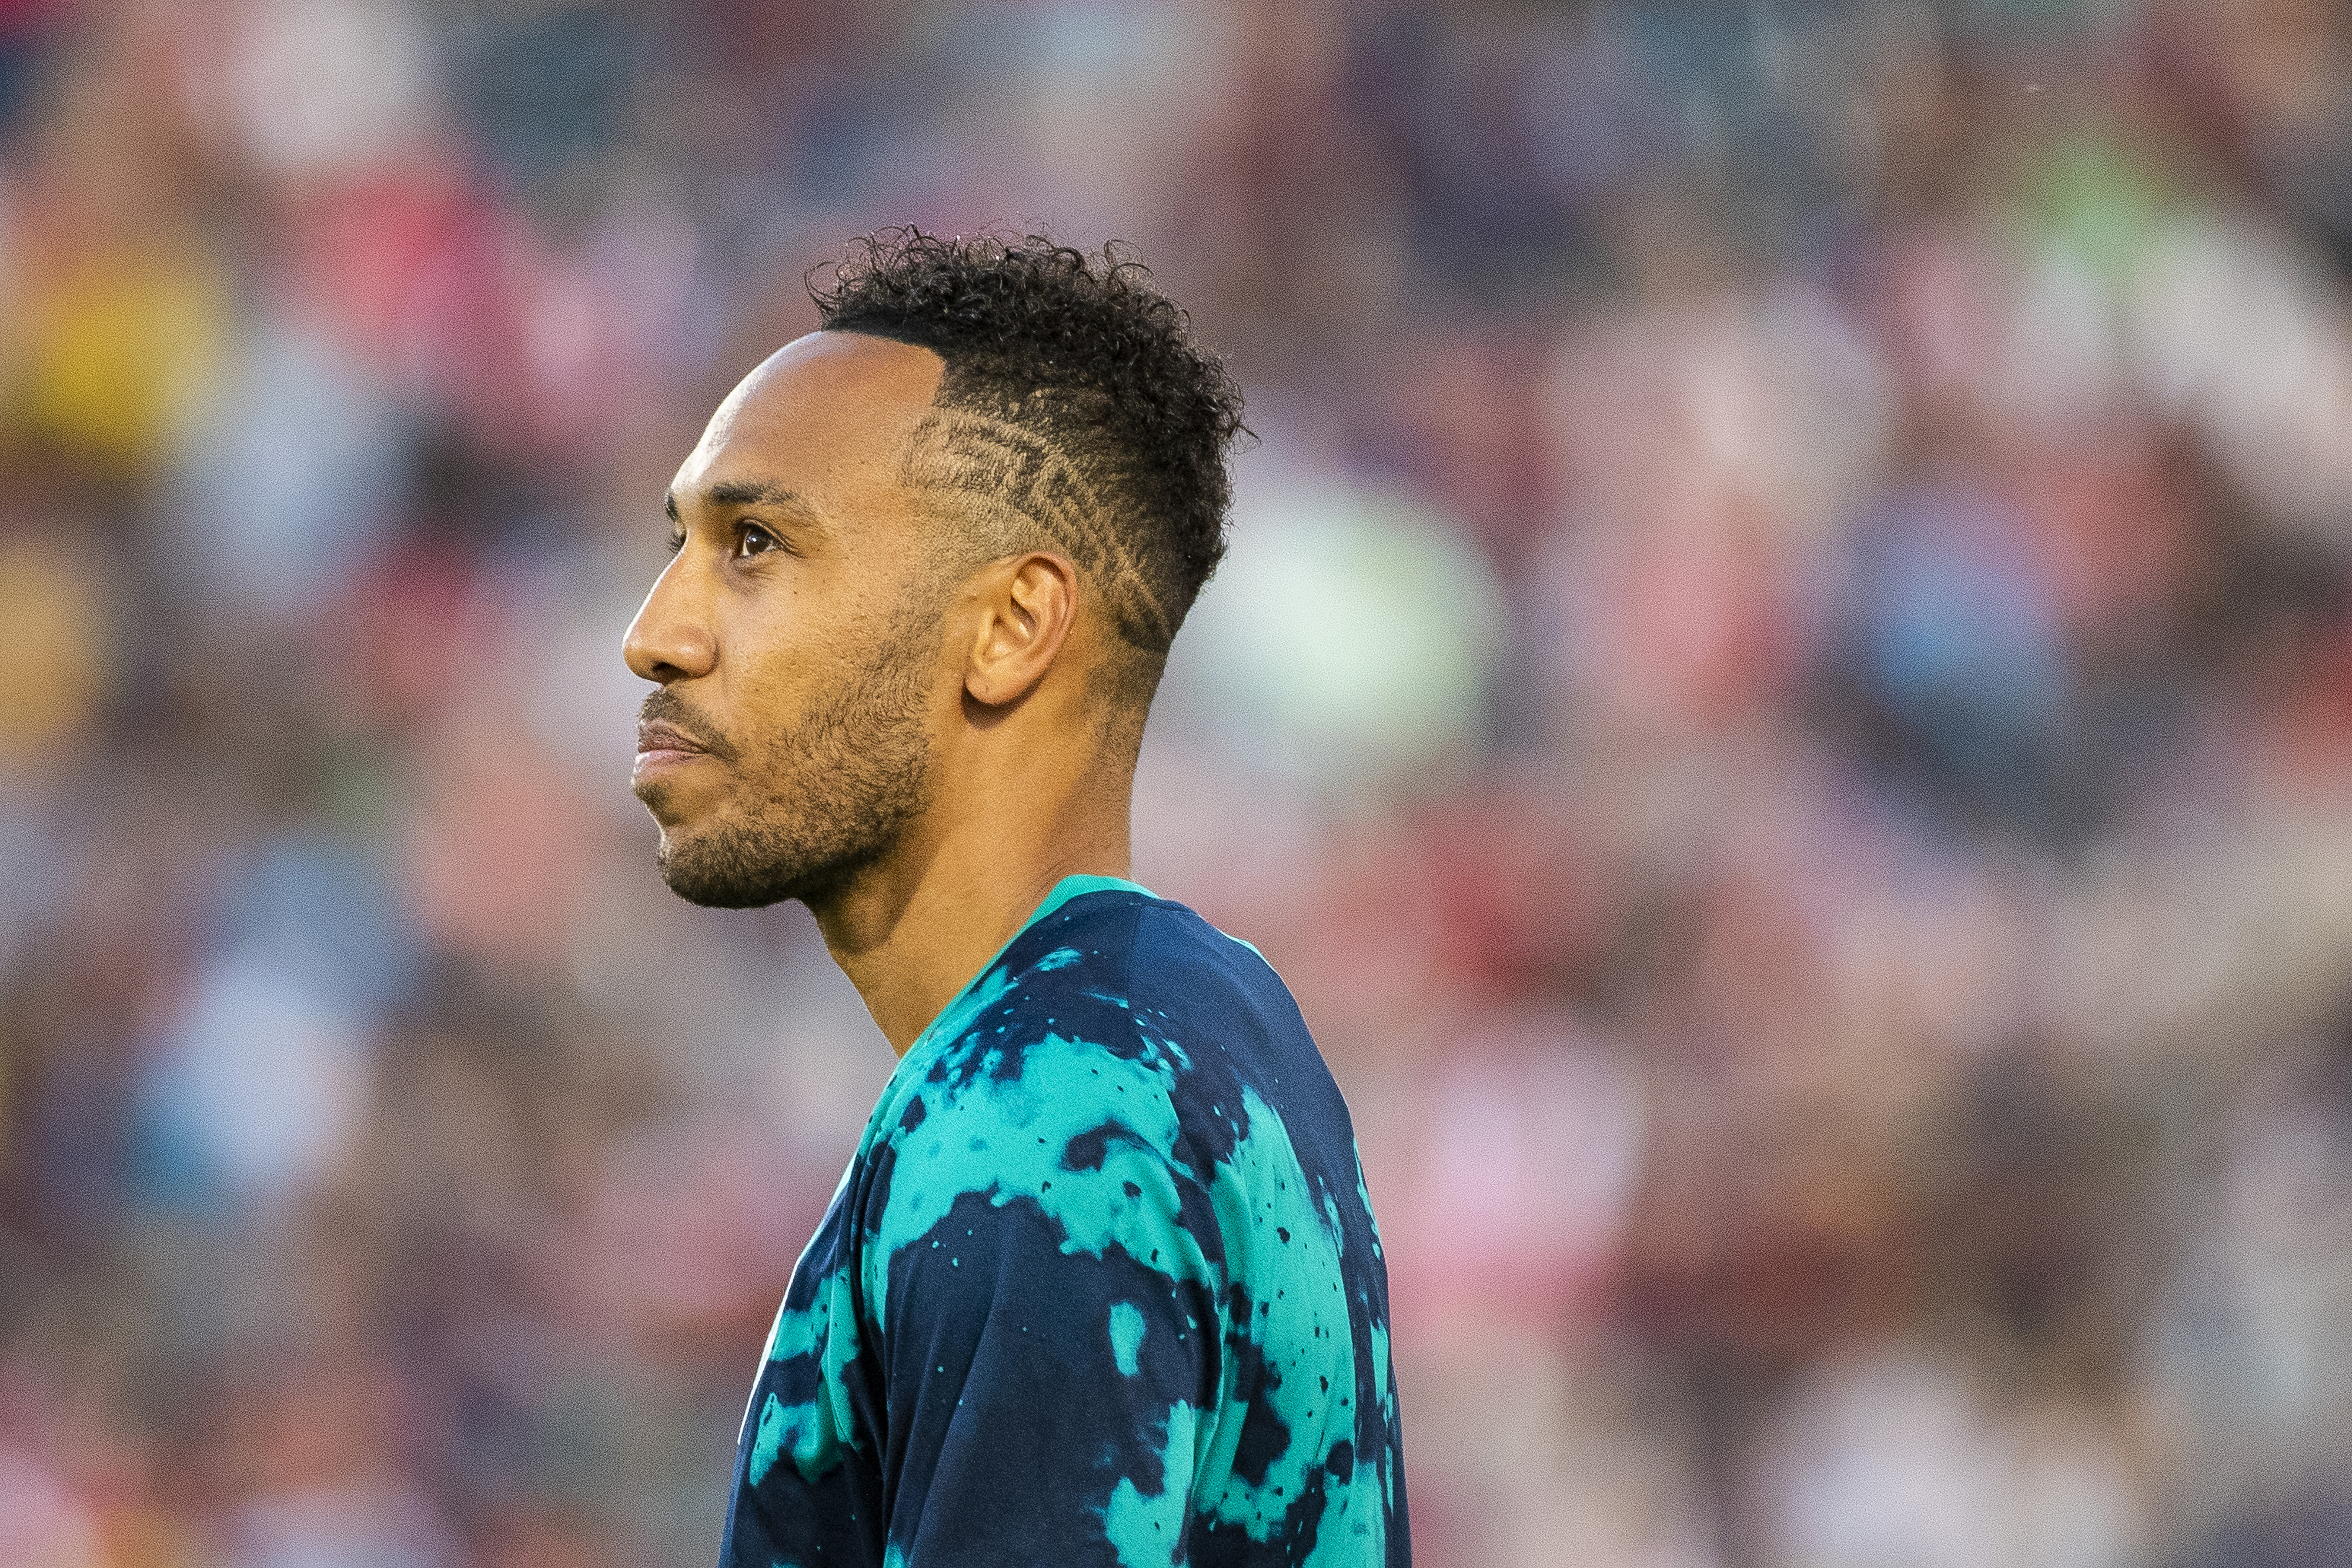 OFFICIAL: Chelsea's Aubameyang signs for Olympique Marseille until 2026